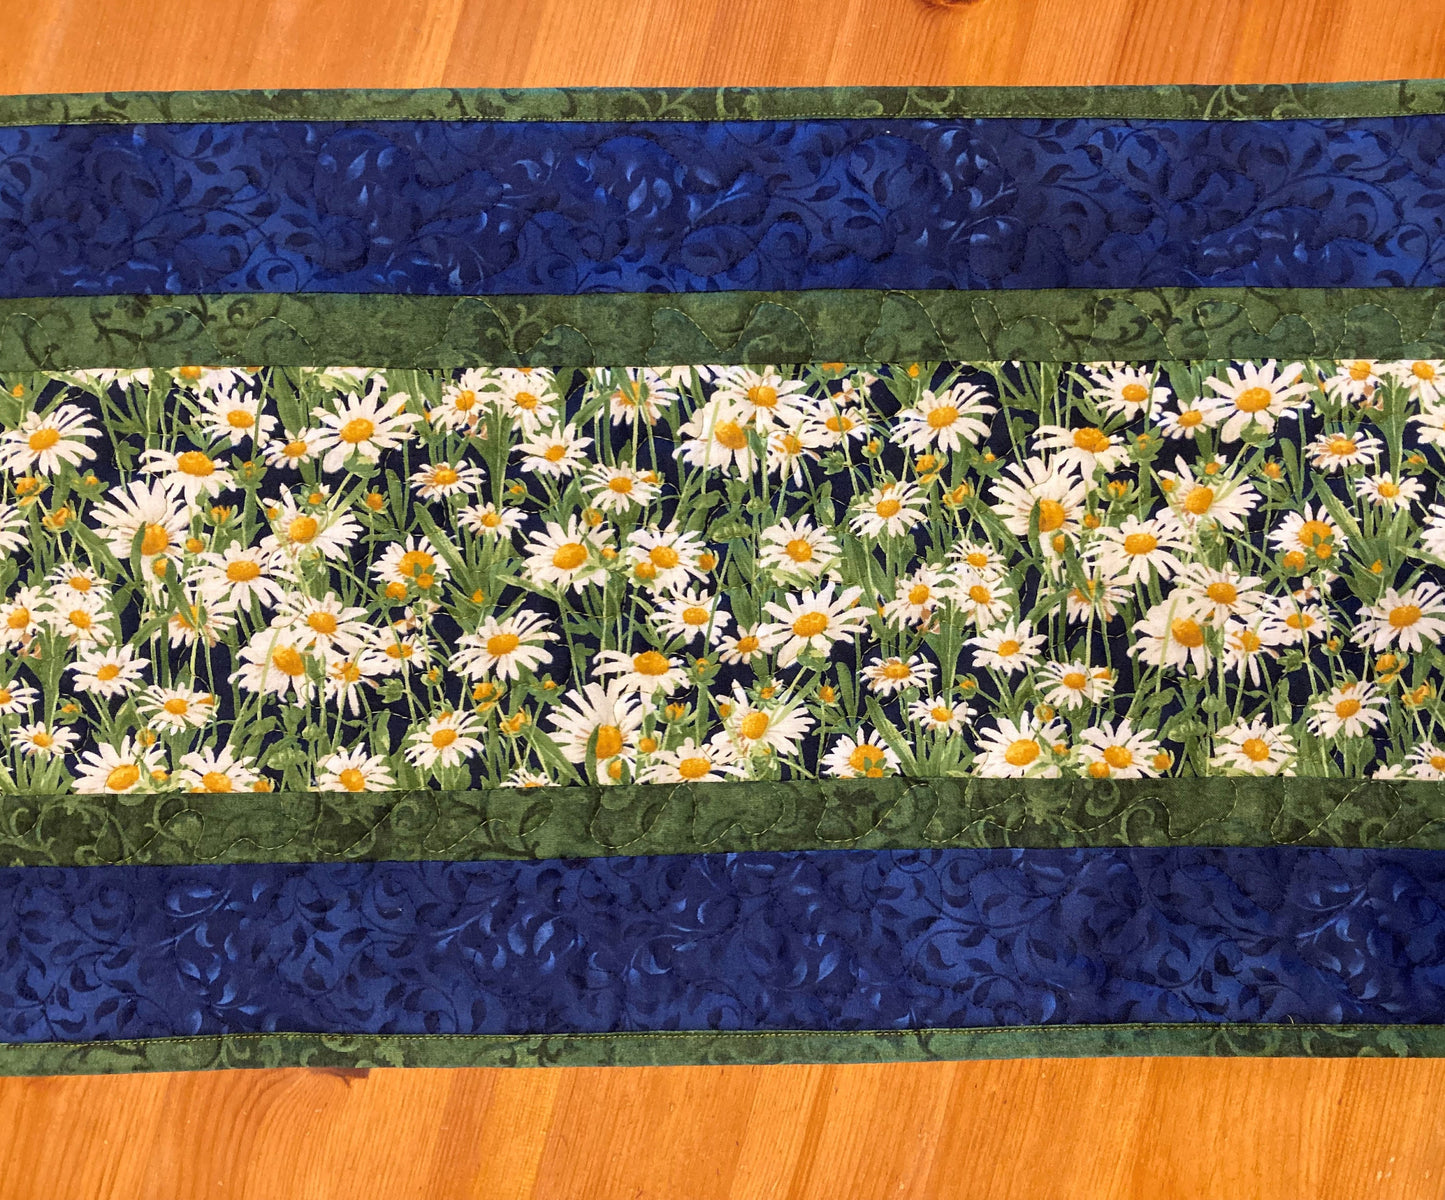 White Daisies Wildflower Quilted Table Runner+ Topper, Dining Room Coffee Table Reversible 13x48" Summer Runner End Table, Garden Everyday